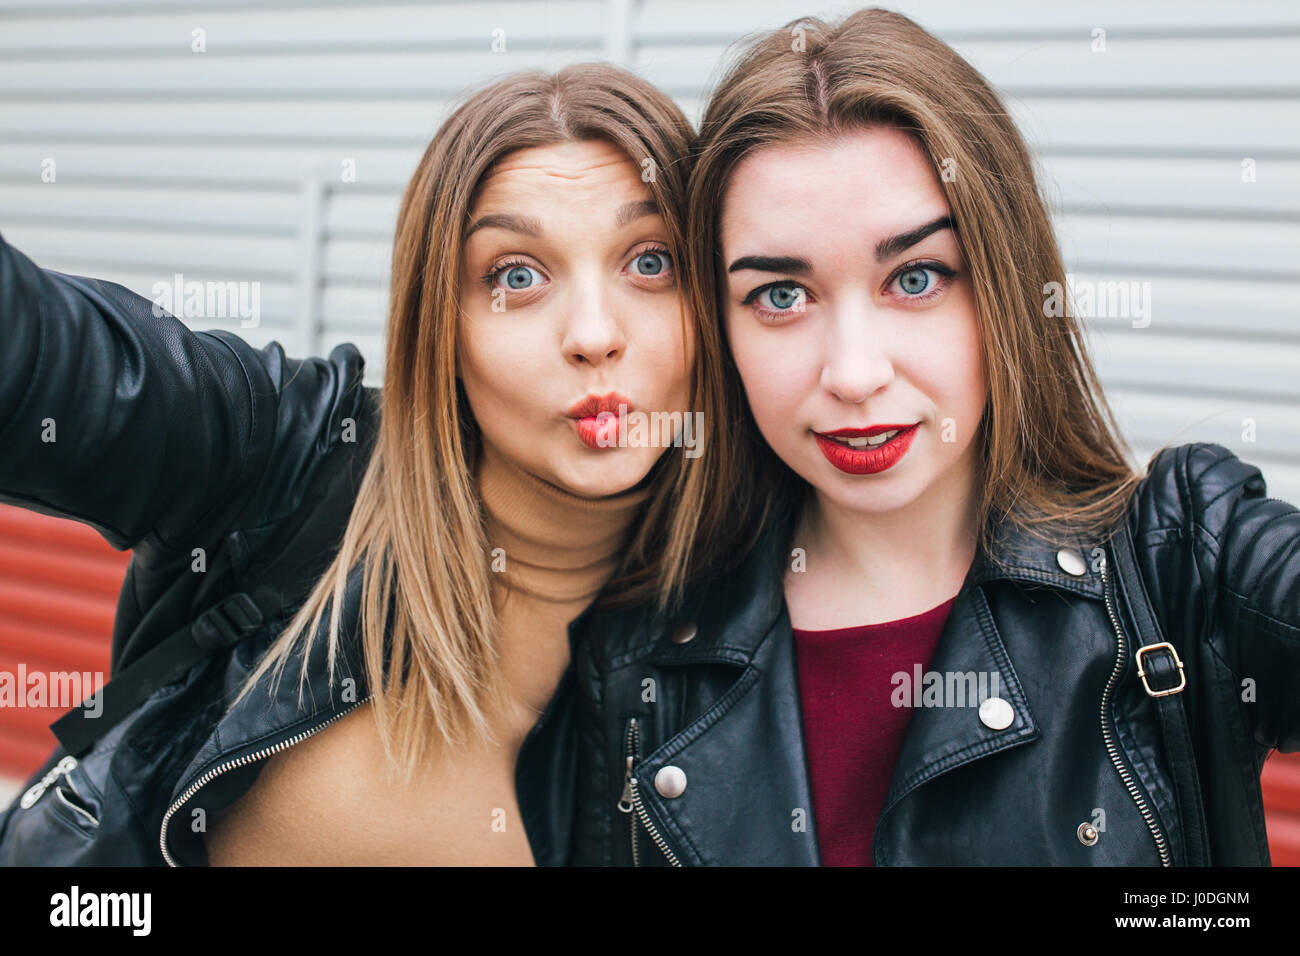 Two young girls taking selfie using smartphone Stock Photo